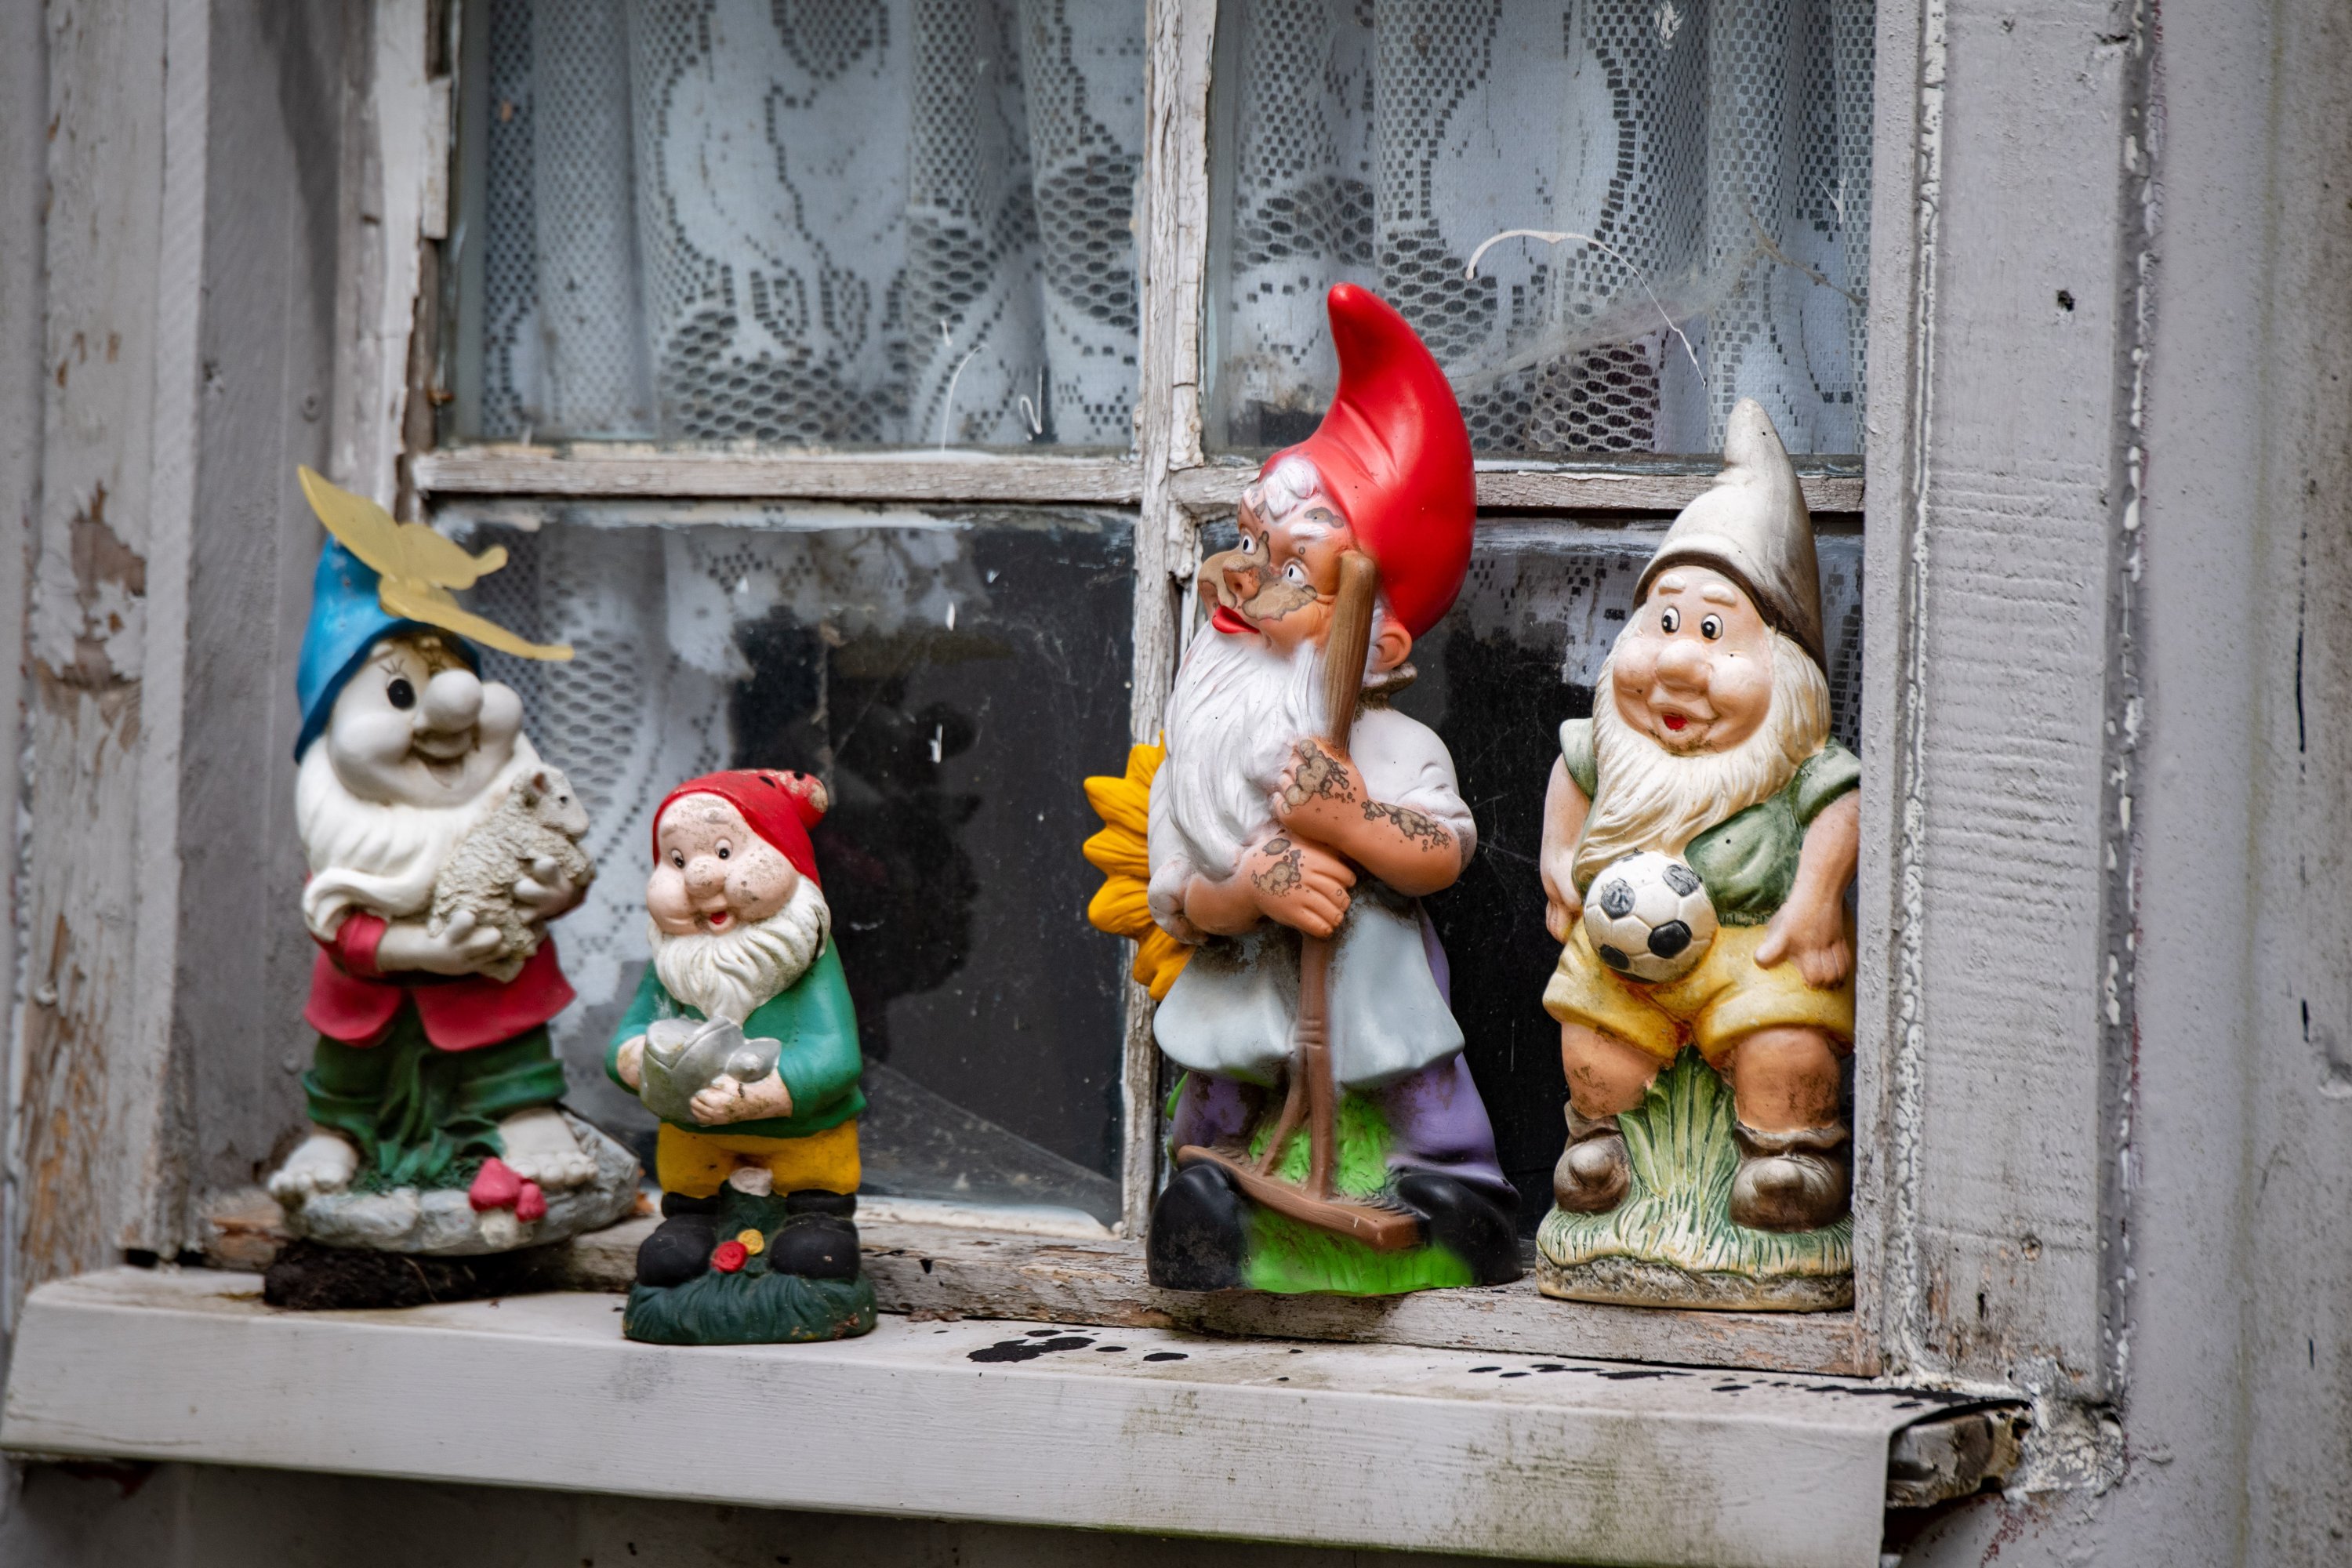 Once an expression of wealth, today garden gnomes are the epitome of bad taste. (DPA)